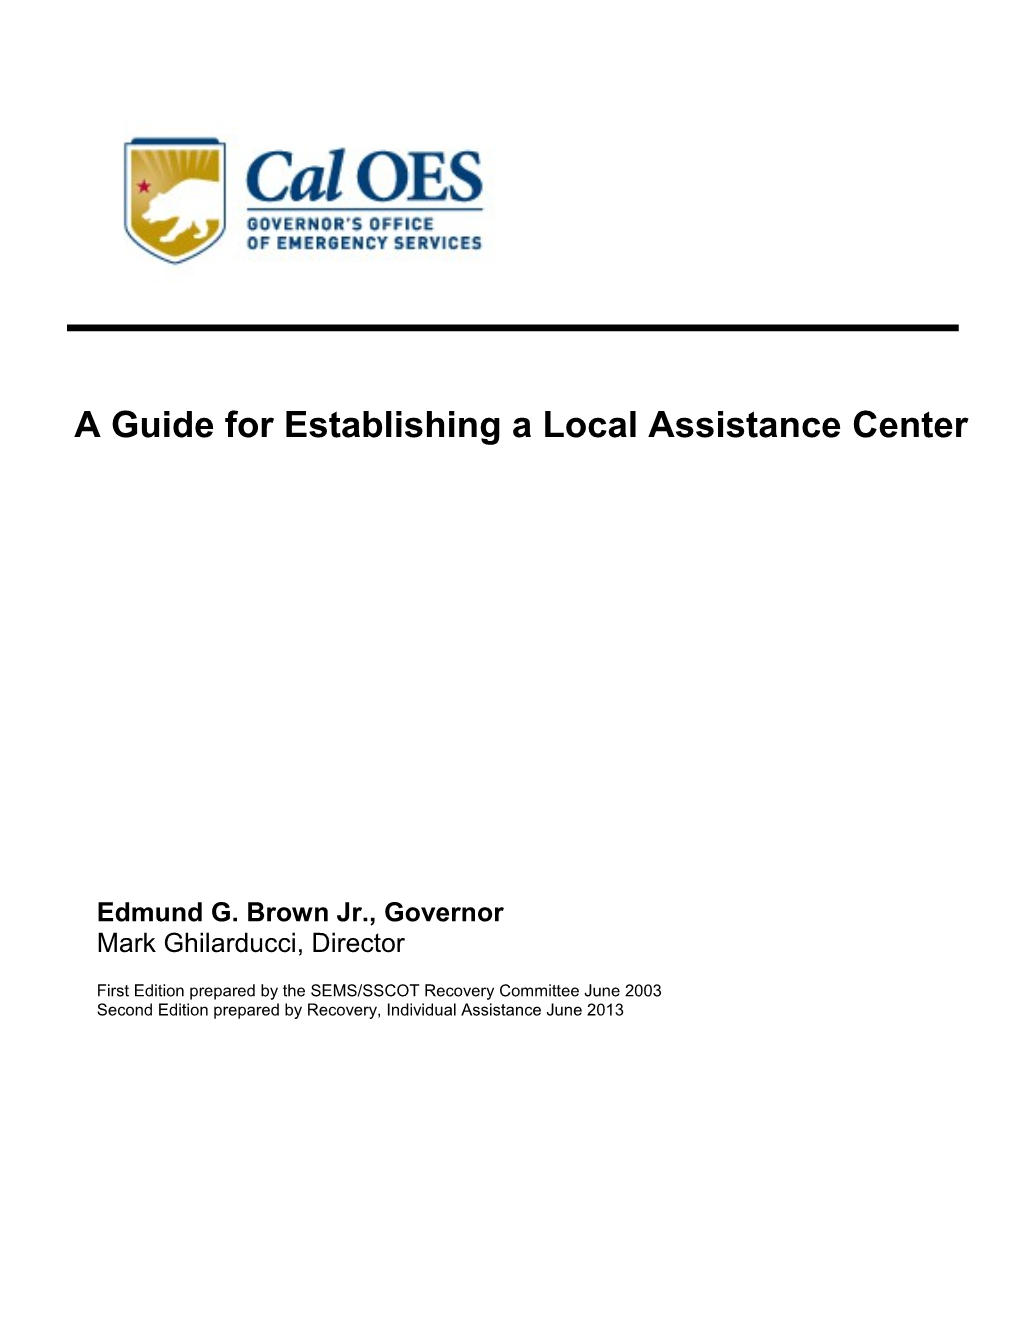 Local Assistance Center Guide for Local Government